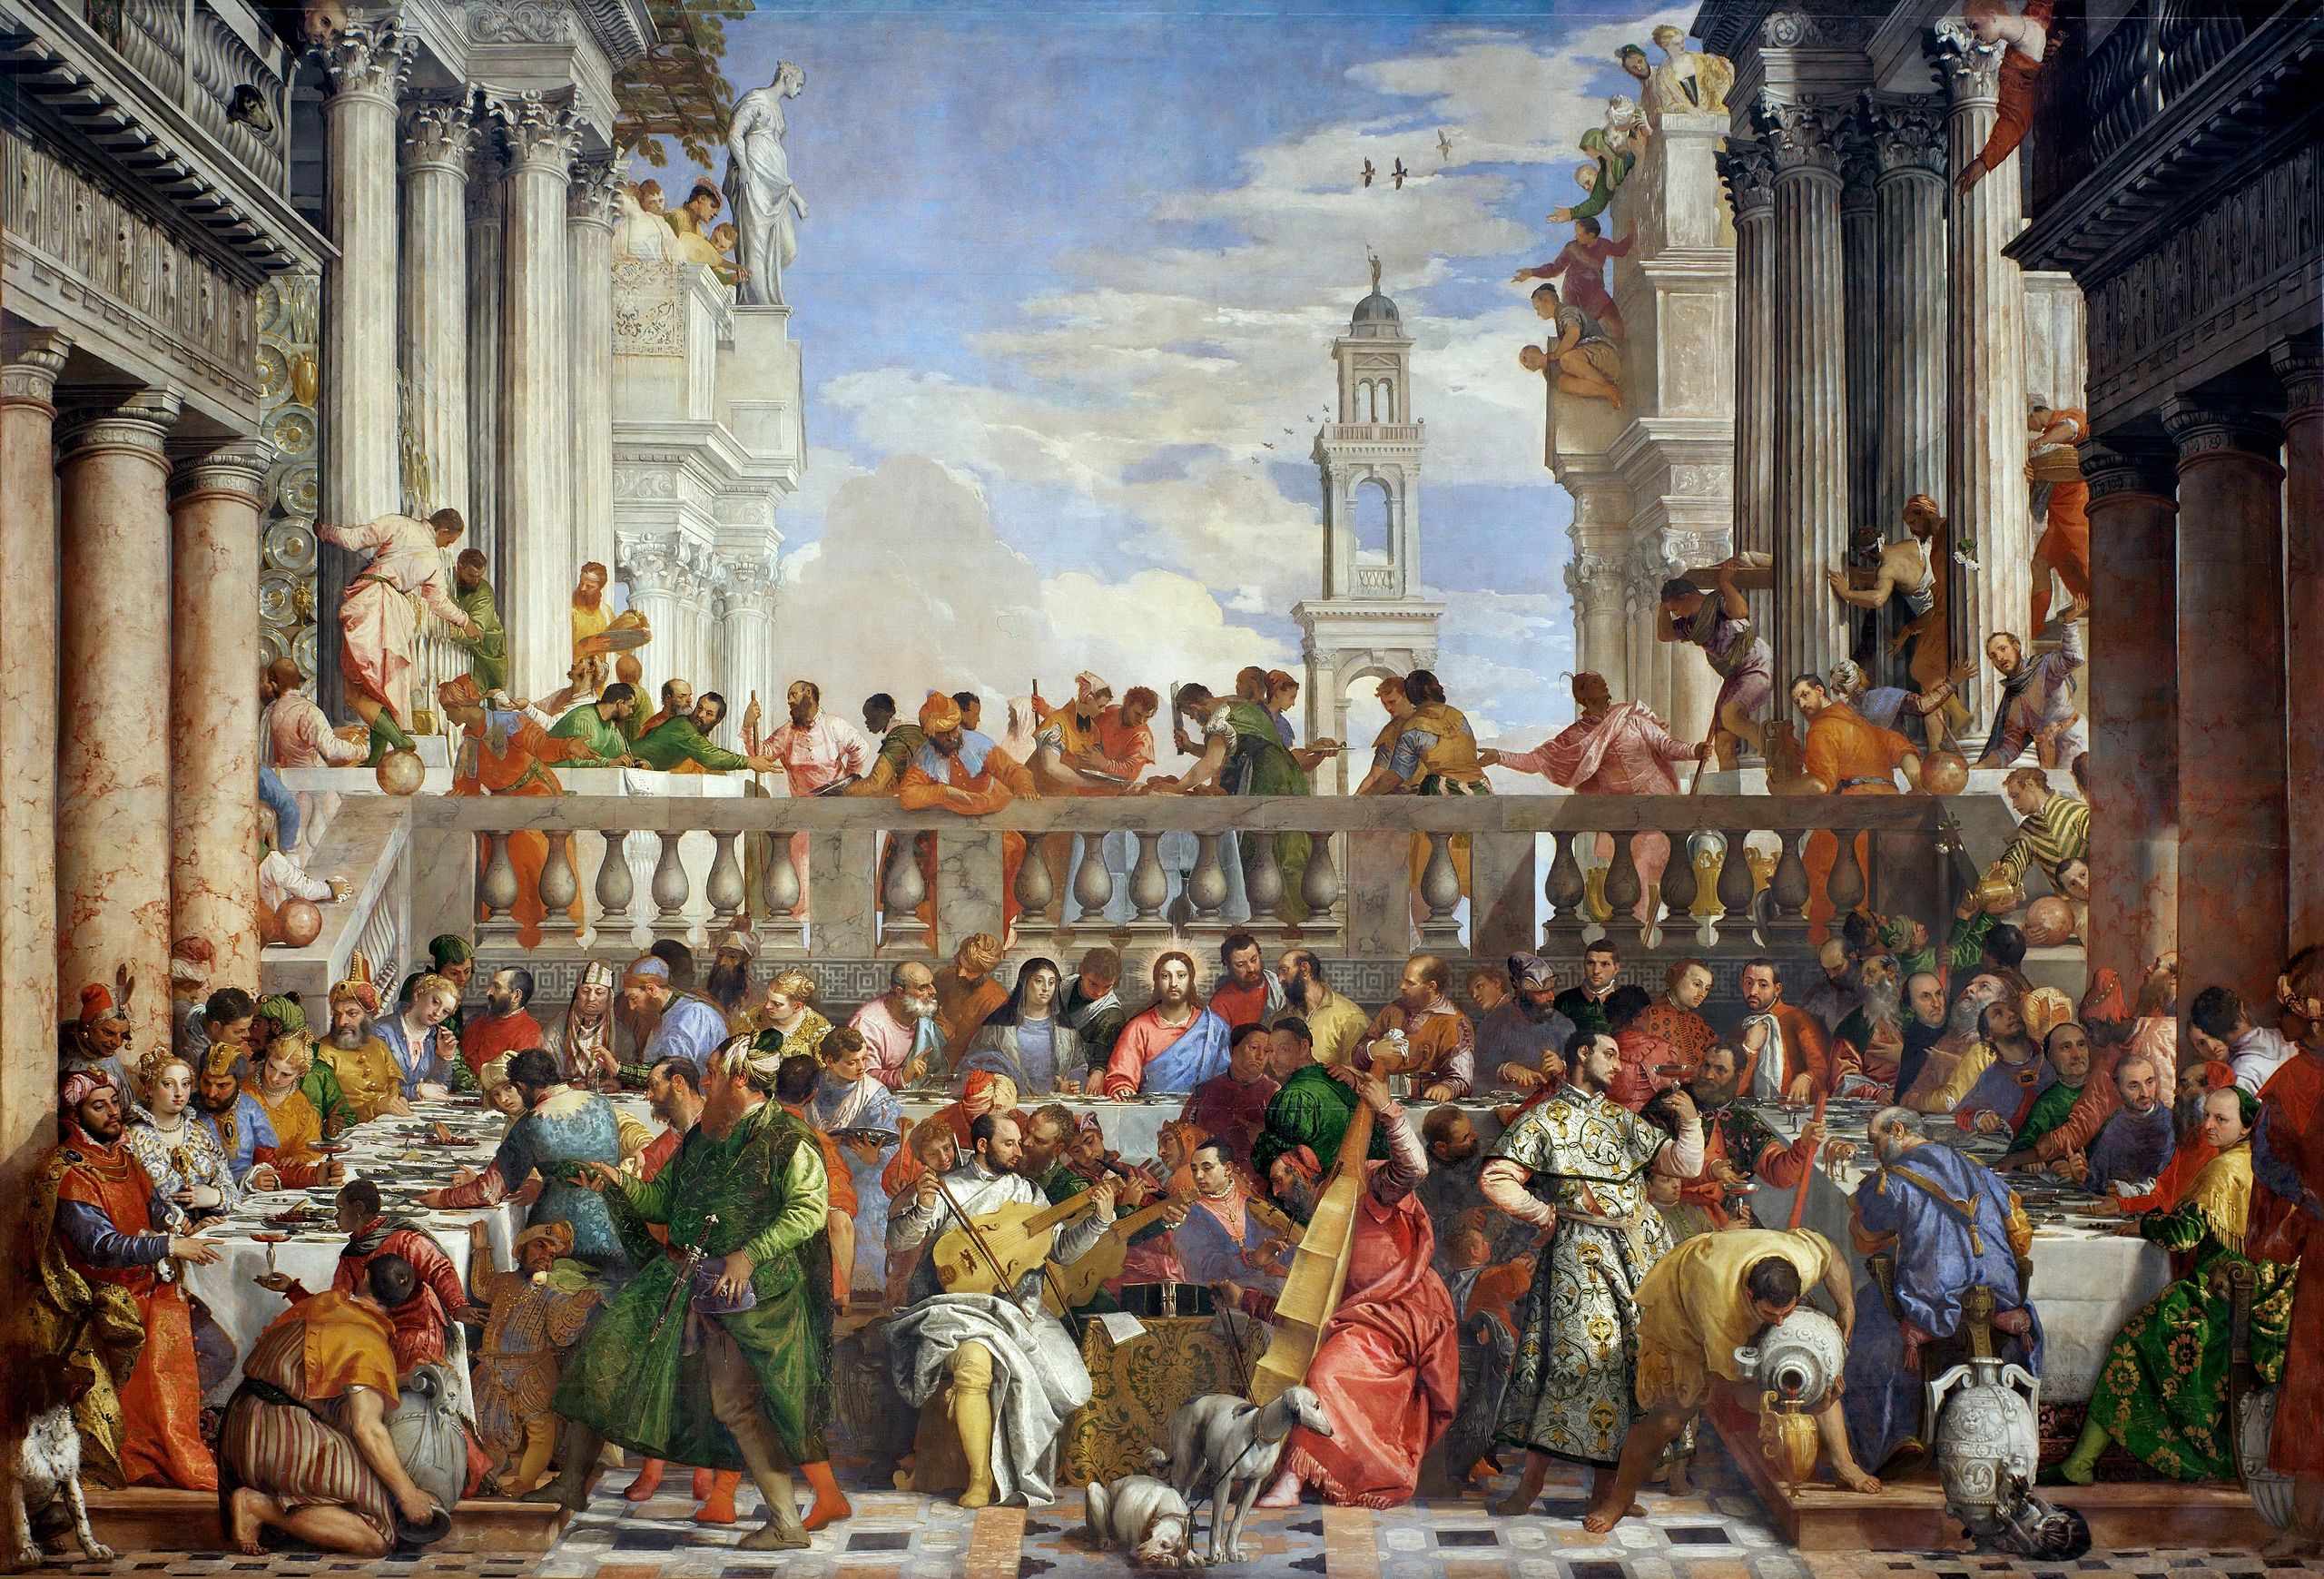 Paolo Veronese, Marriage at Cana, 1563